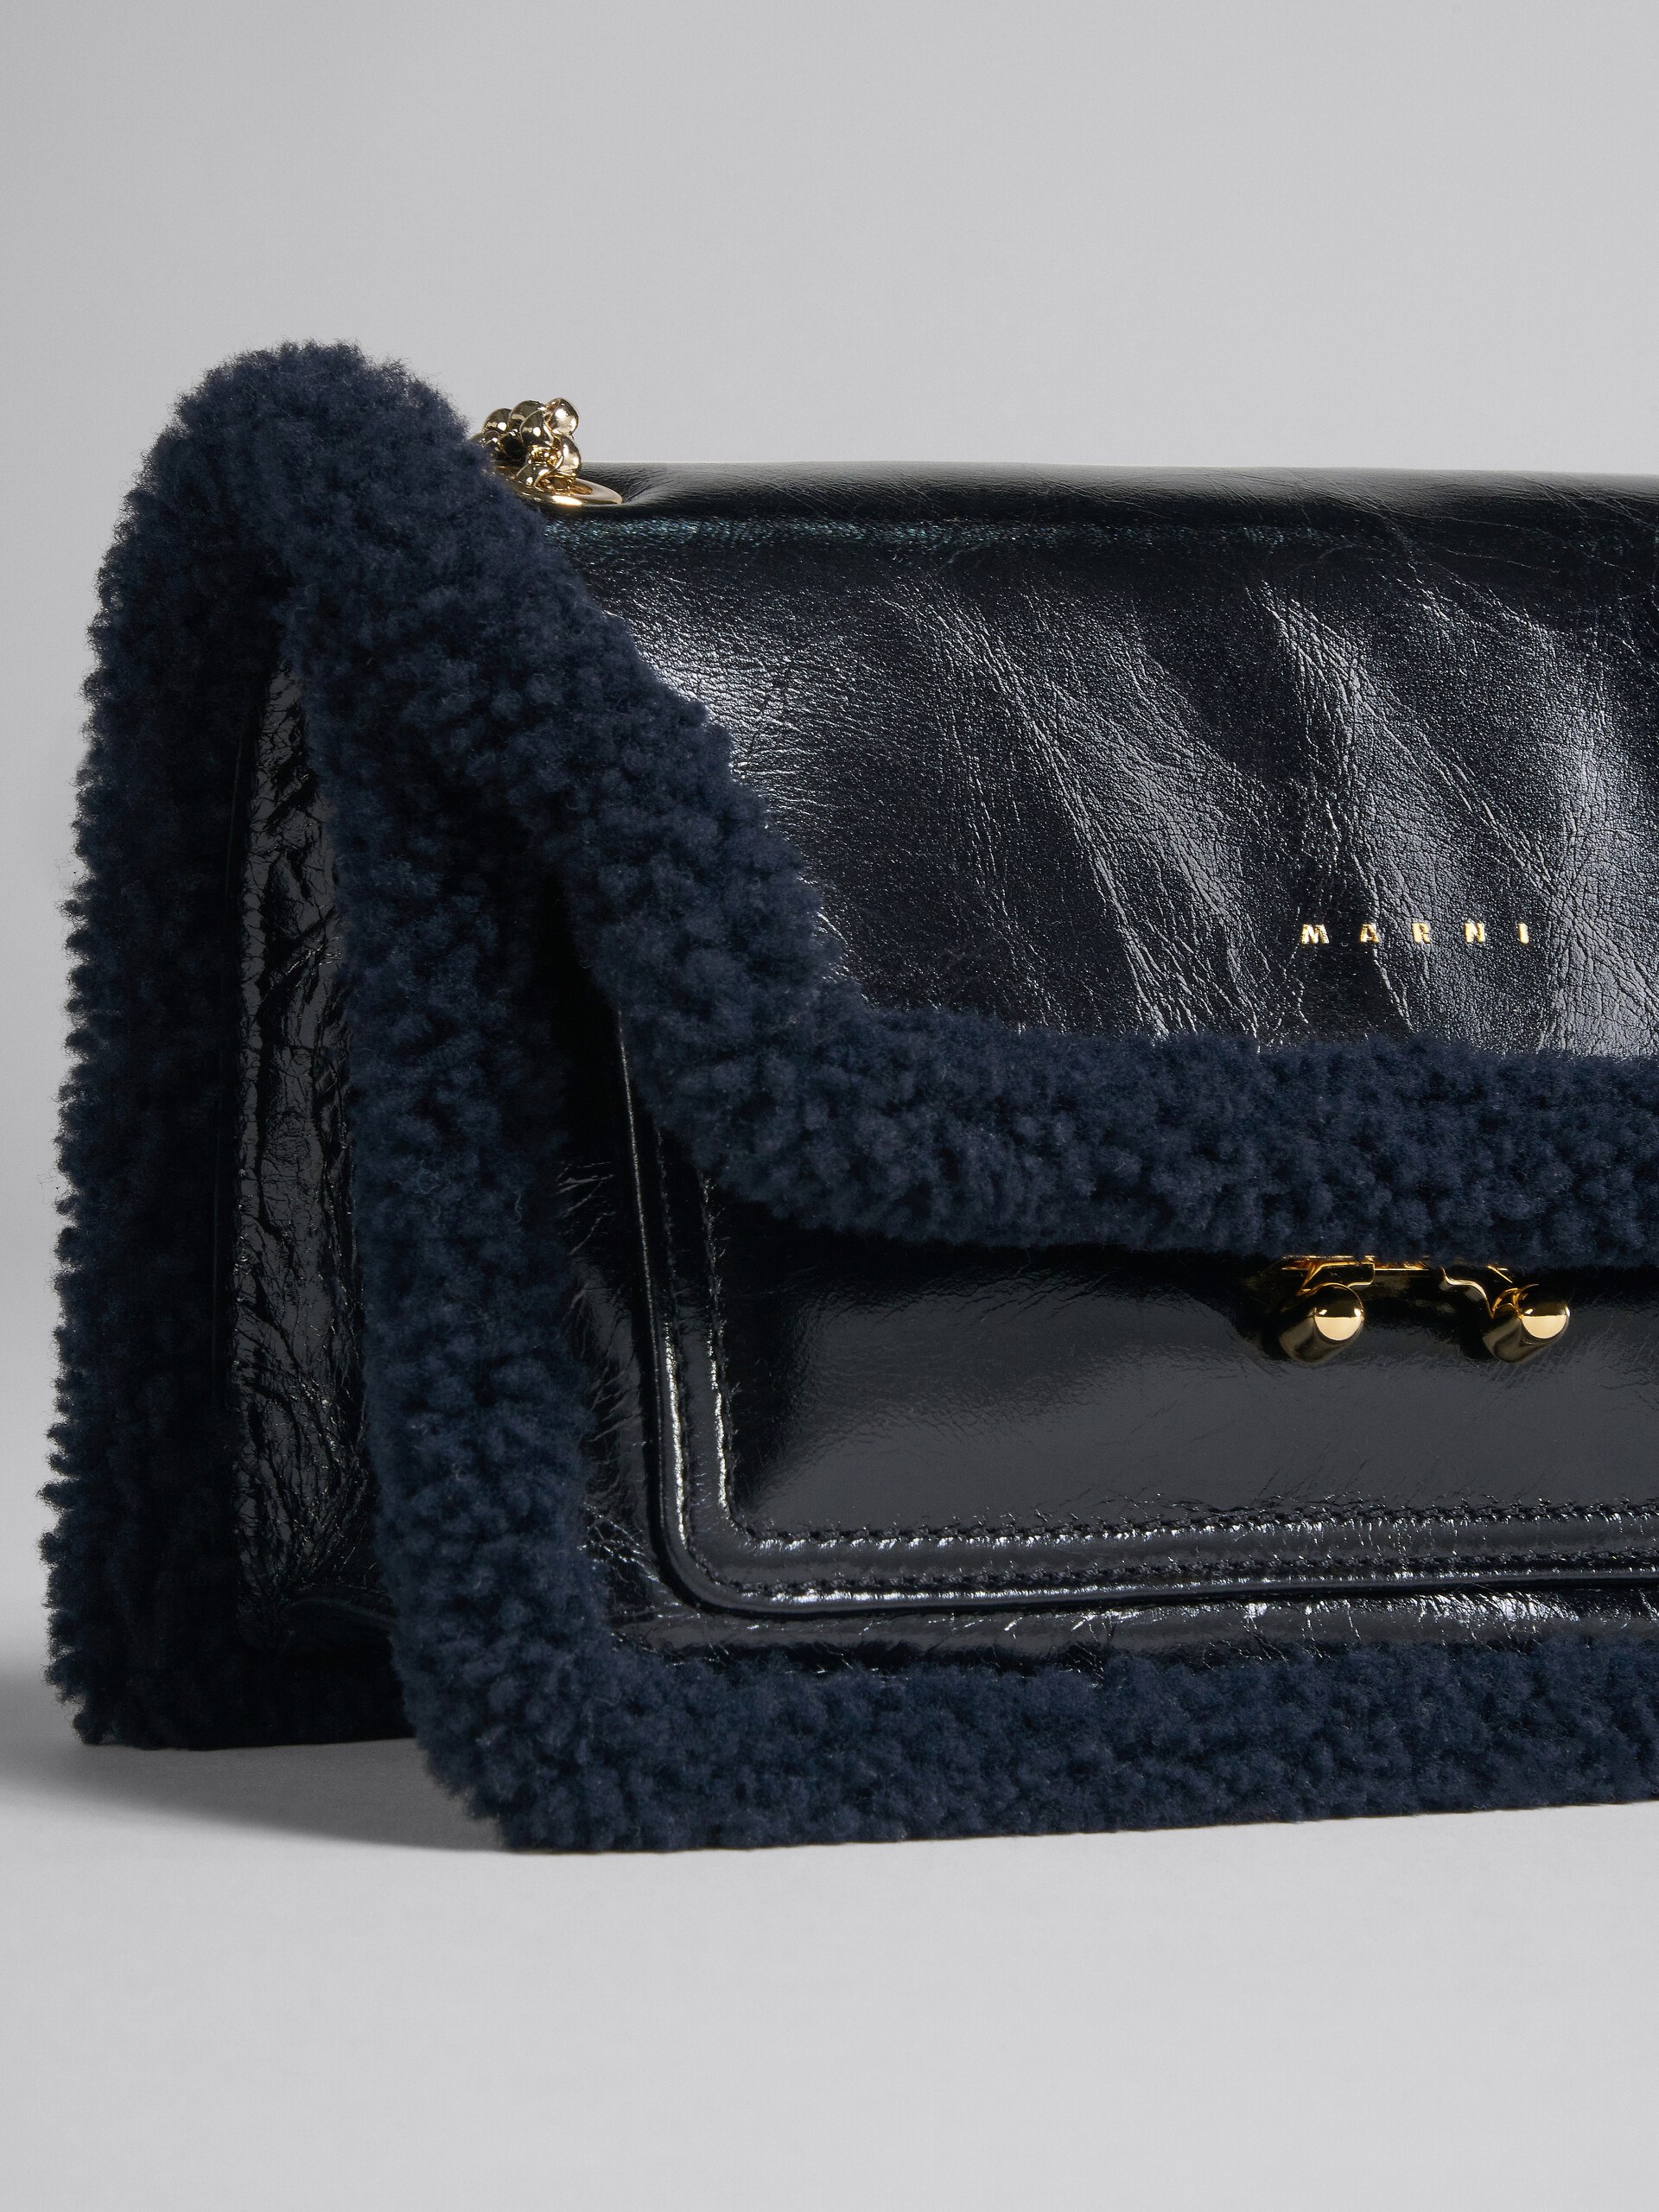 Trunk Envelope Chain in black leather and merinos - Shoulder Bags - Image 5